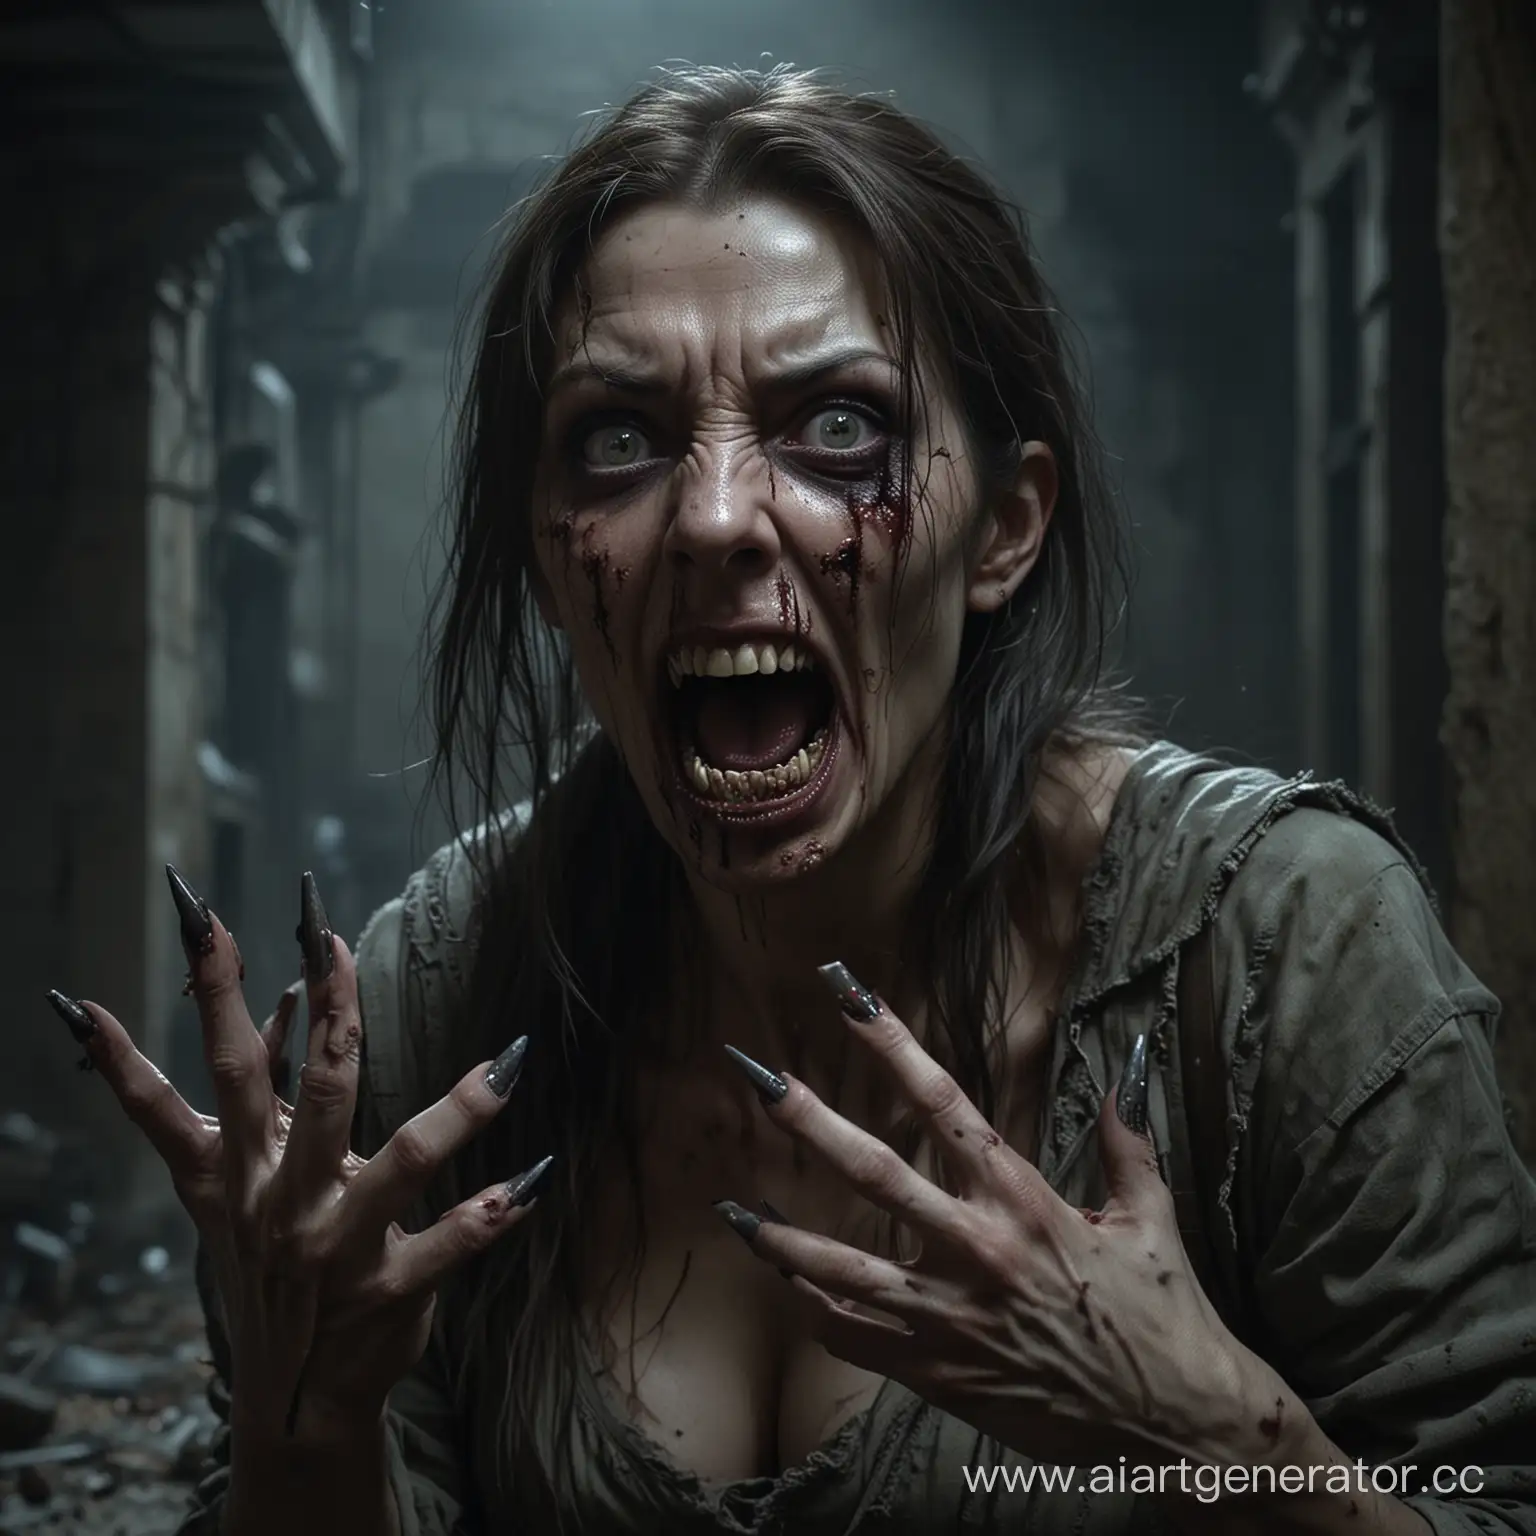 A Terrible zombie woman with long curved pointed nails protruding from her five fingers like menacing claws, she looks like a who has climbed out of the grave, her mouth is threateningly open exposing pointed teeth resembling fangs, The scene takes place at night, in an abandoned building, realistic shaded lighting, photorealism.